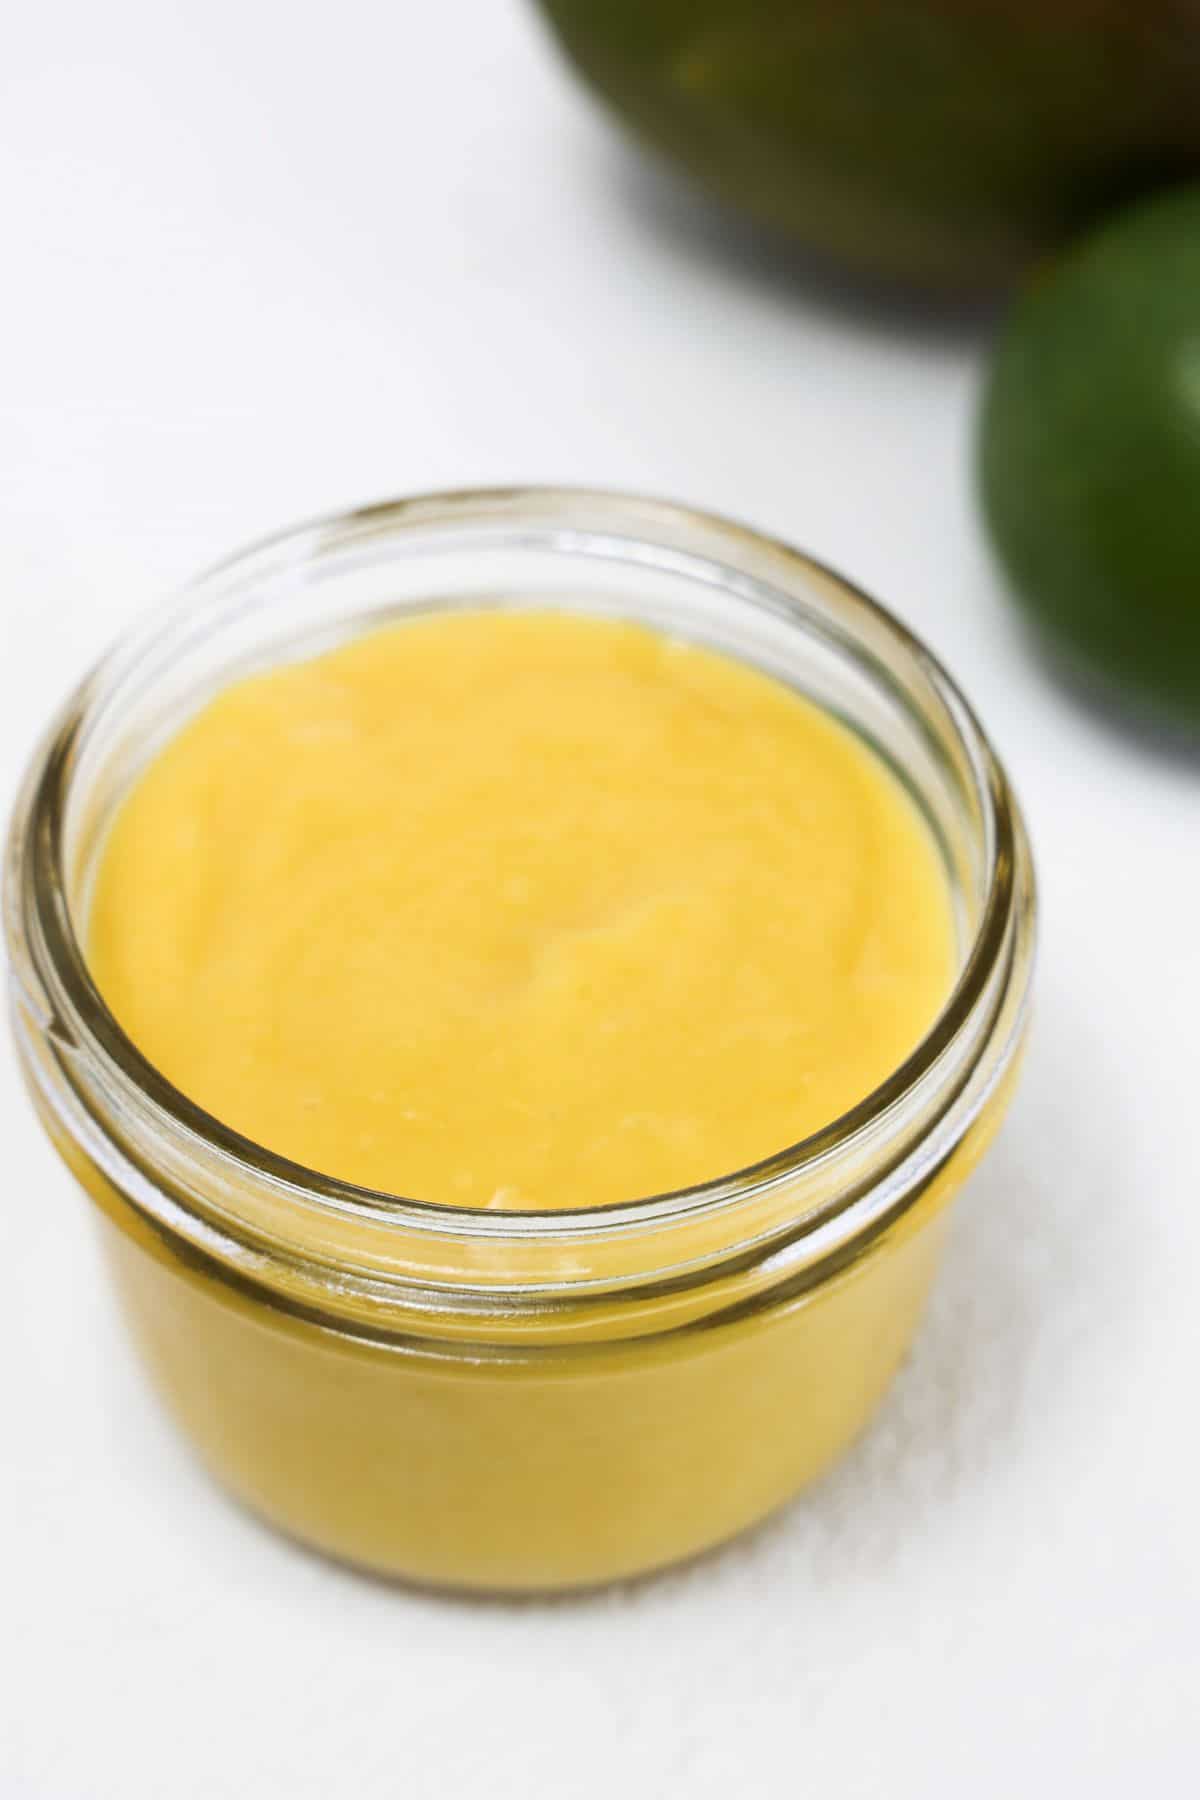 Mango salad dressing in a small glass jar without a lid.